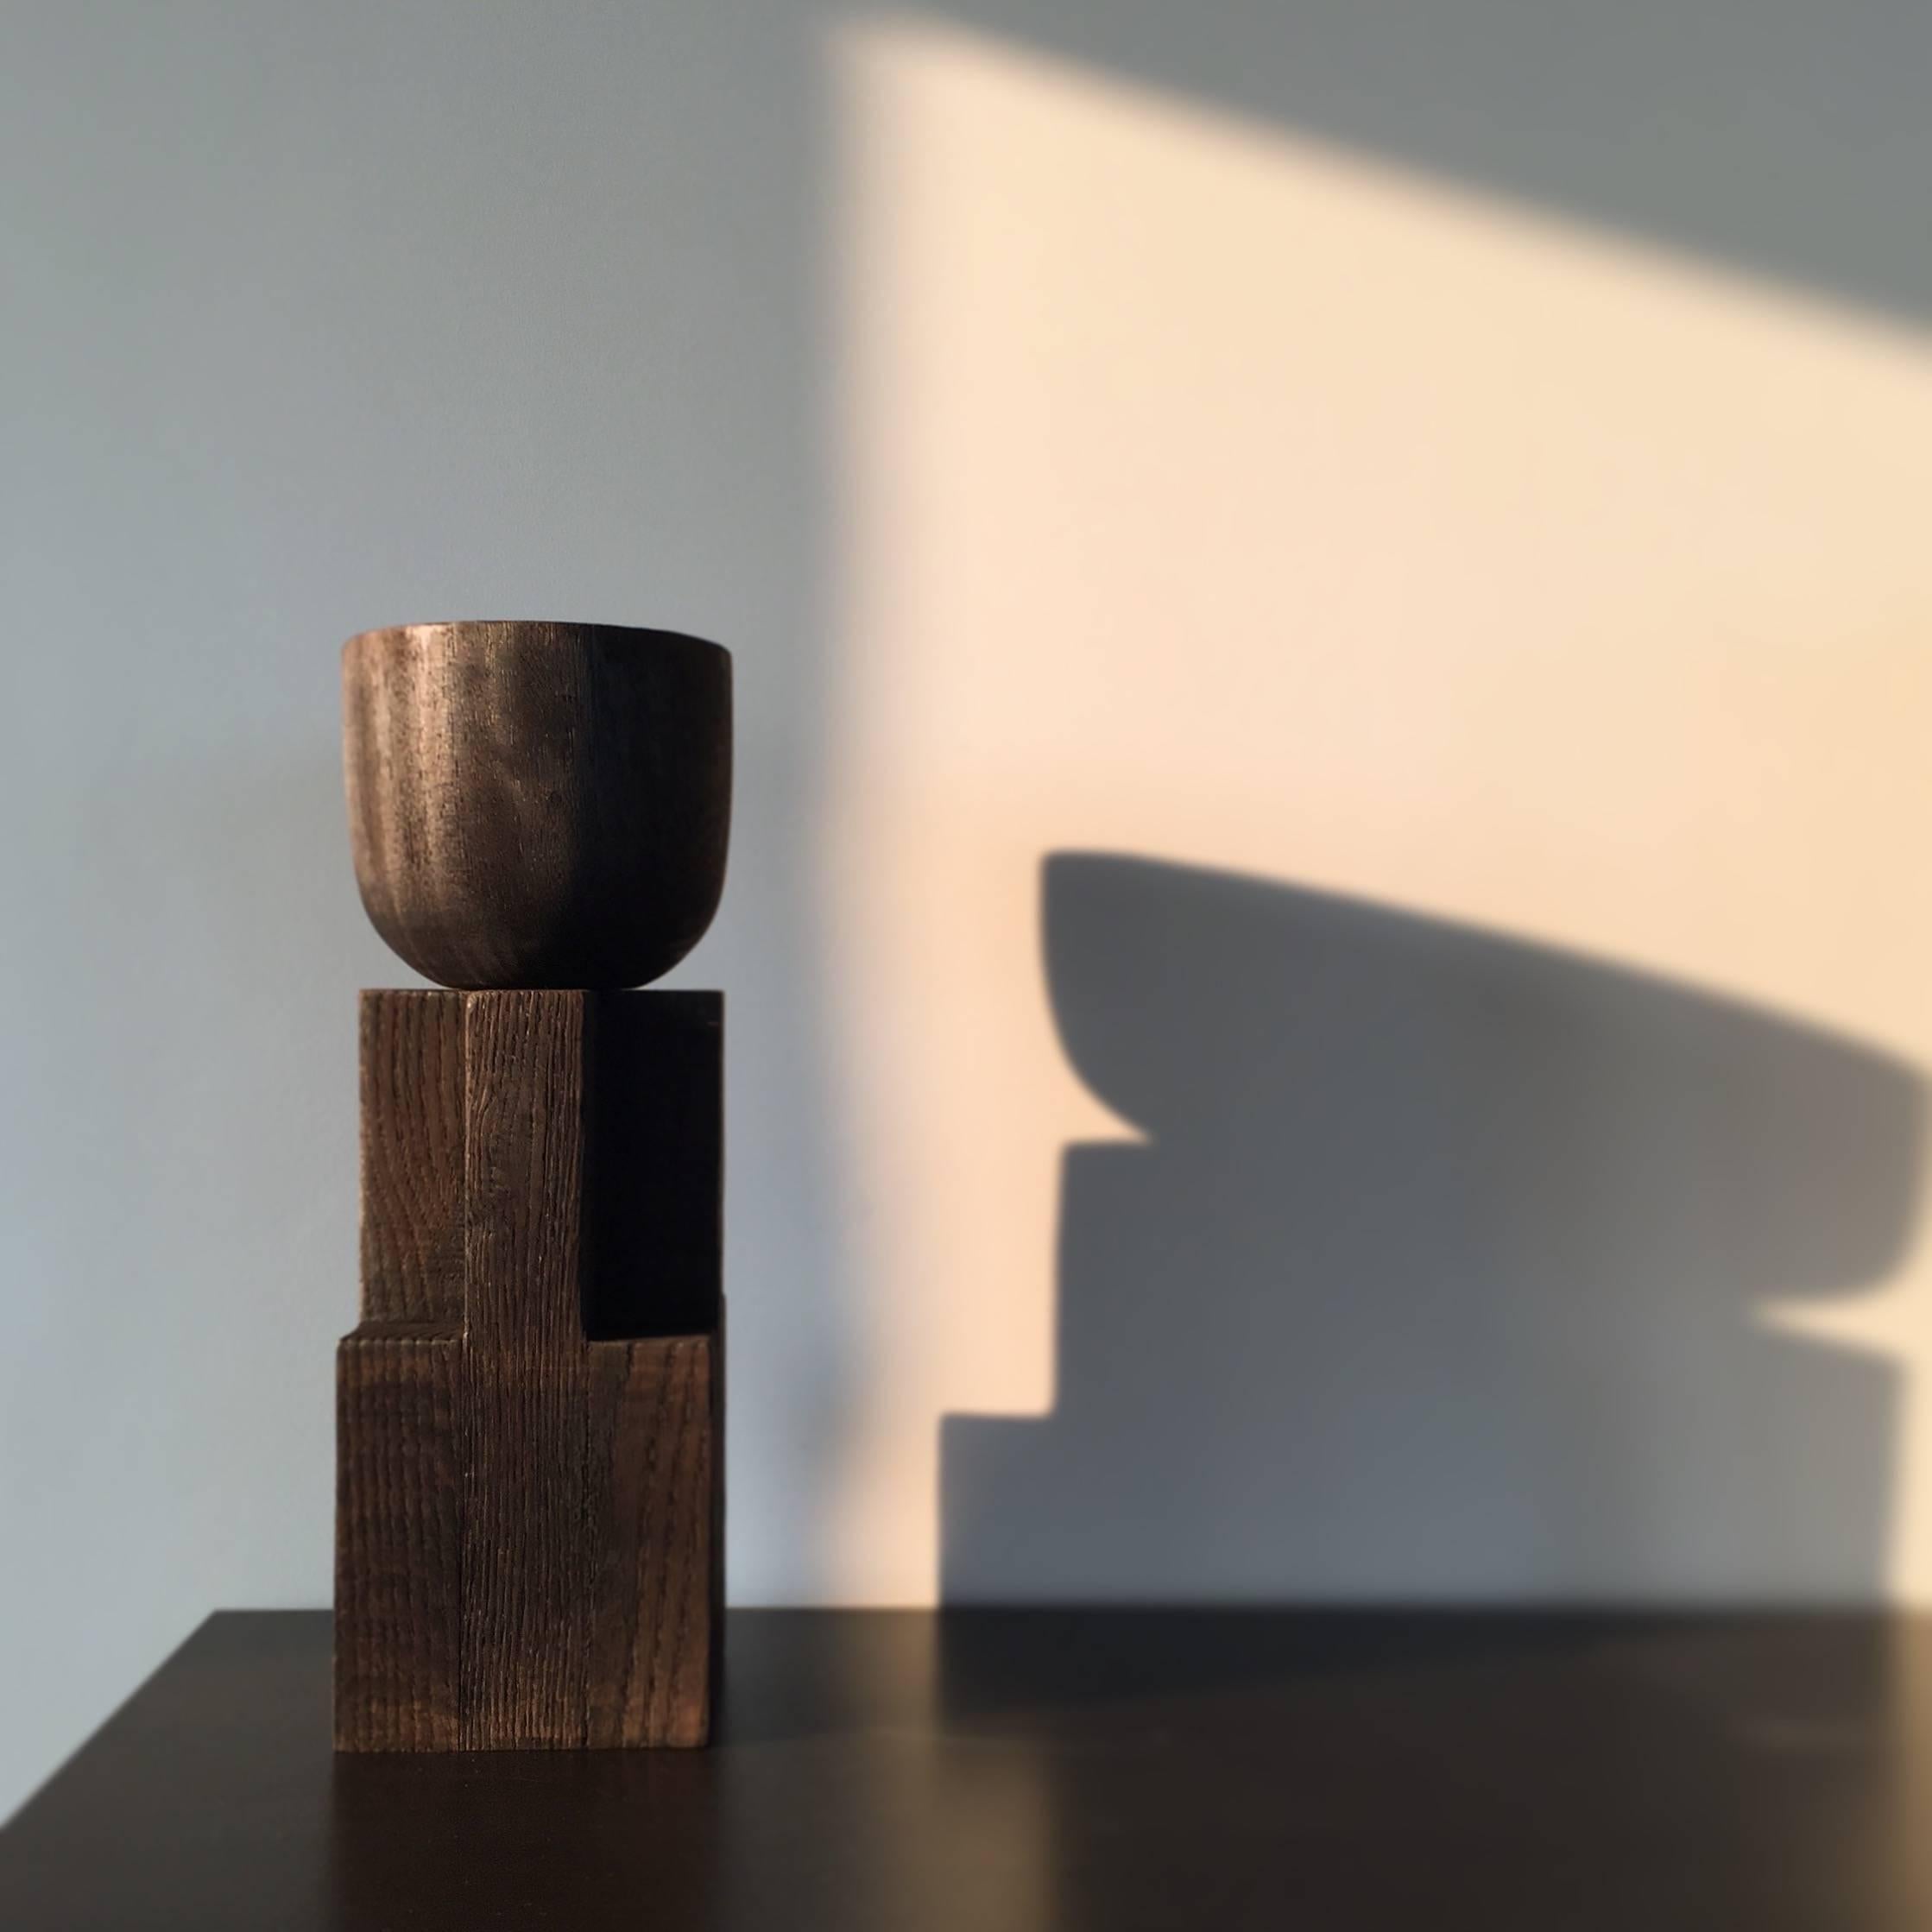 Pair of goblet bowl
Object / Tray
Measures: 40 cm H x 15 cm W, 15.7” H x 6” W
Iroko wood and oak
Signed by Arno Declercq

Arno Declercq
Belgian designer and art dealer who makes bespoke objects with passion for design, atmosphere, history and